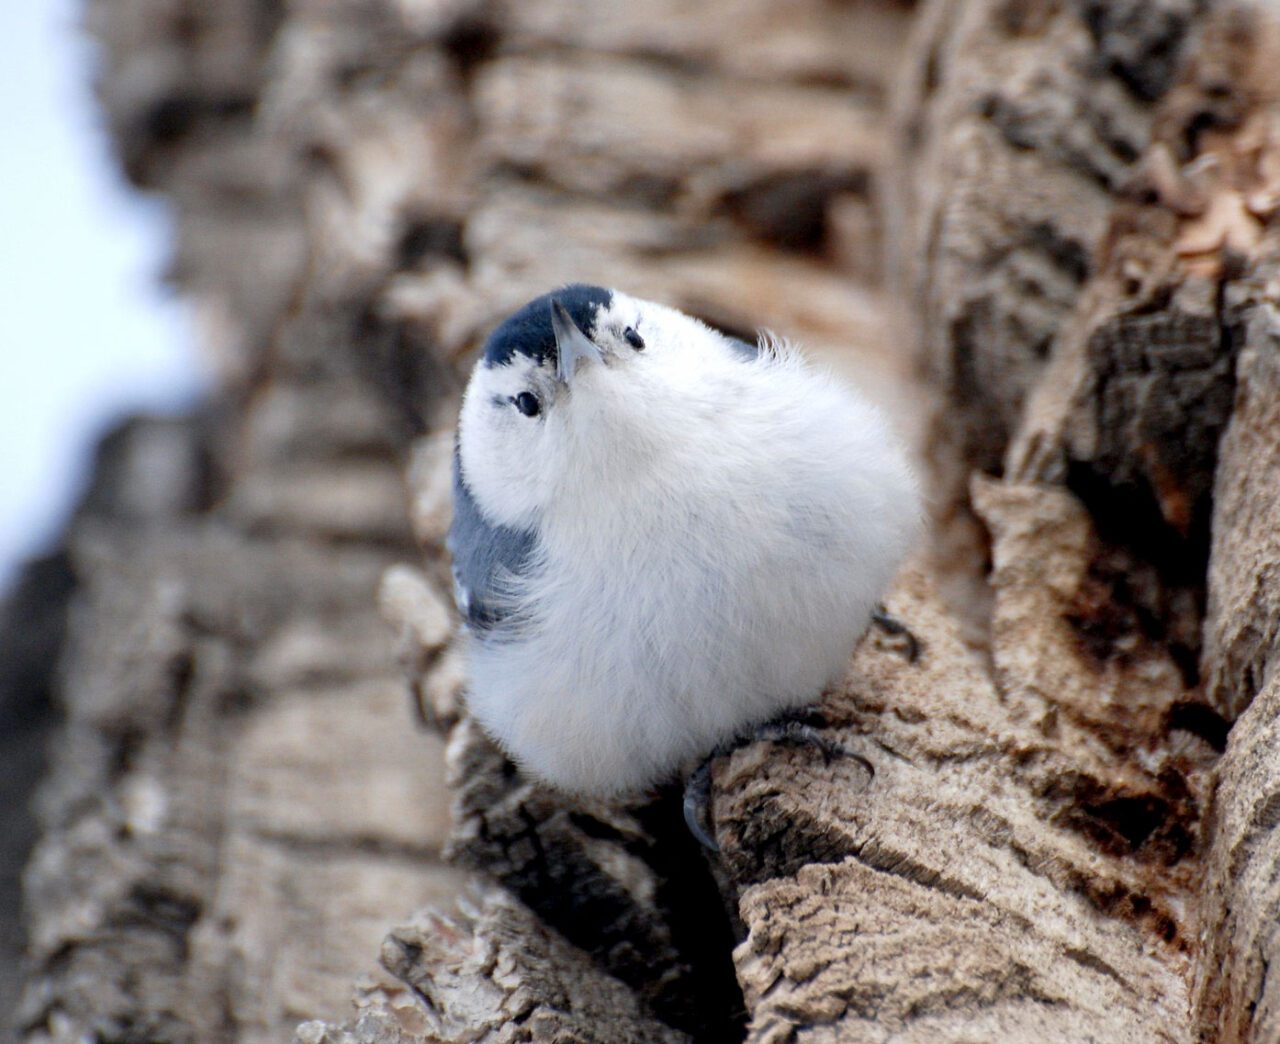 A white breasted fluffy bird on a tree trunk.